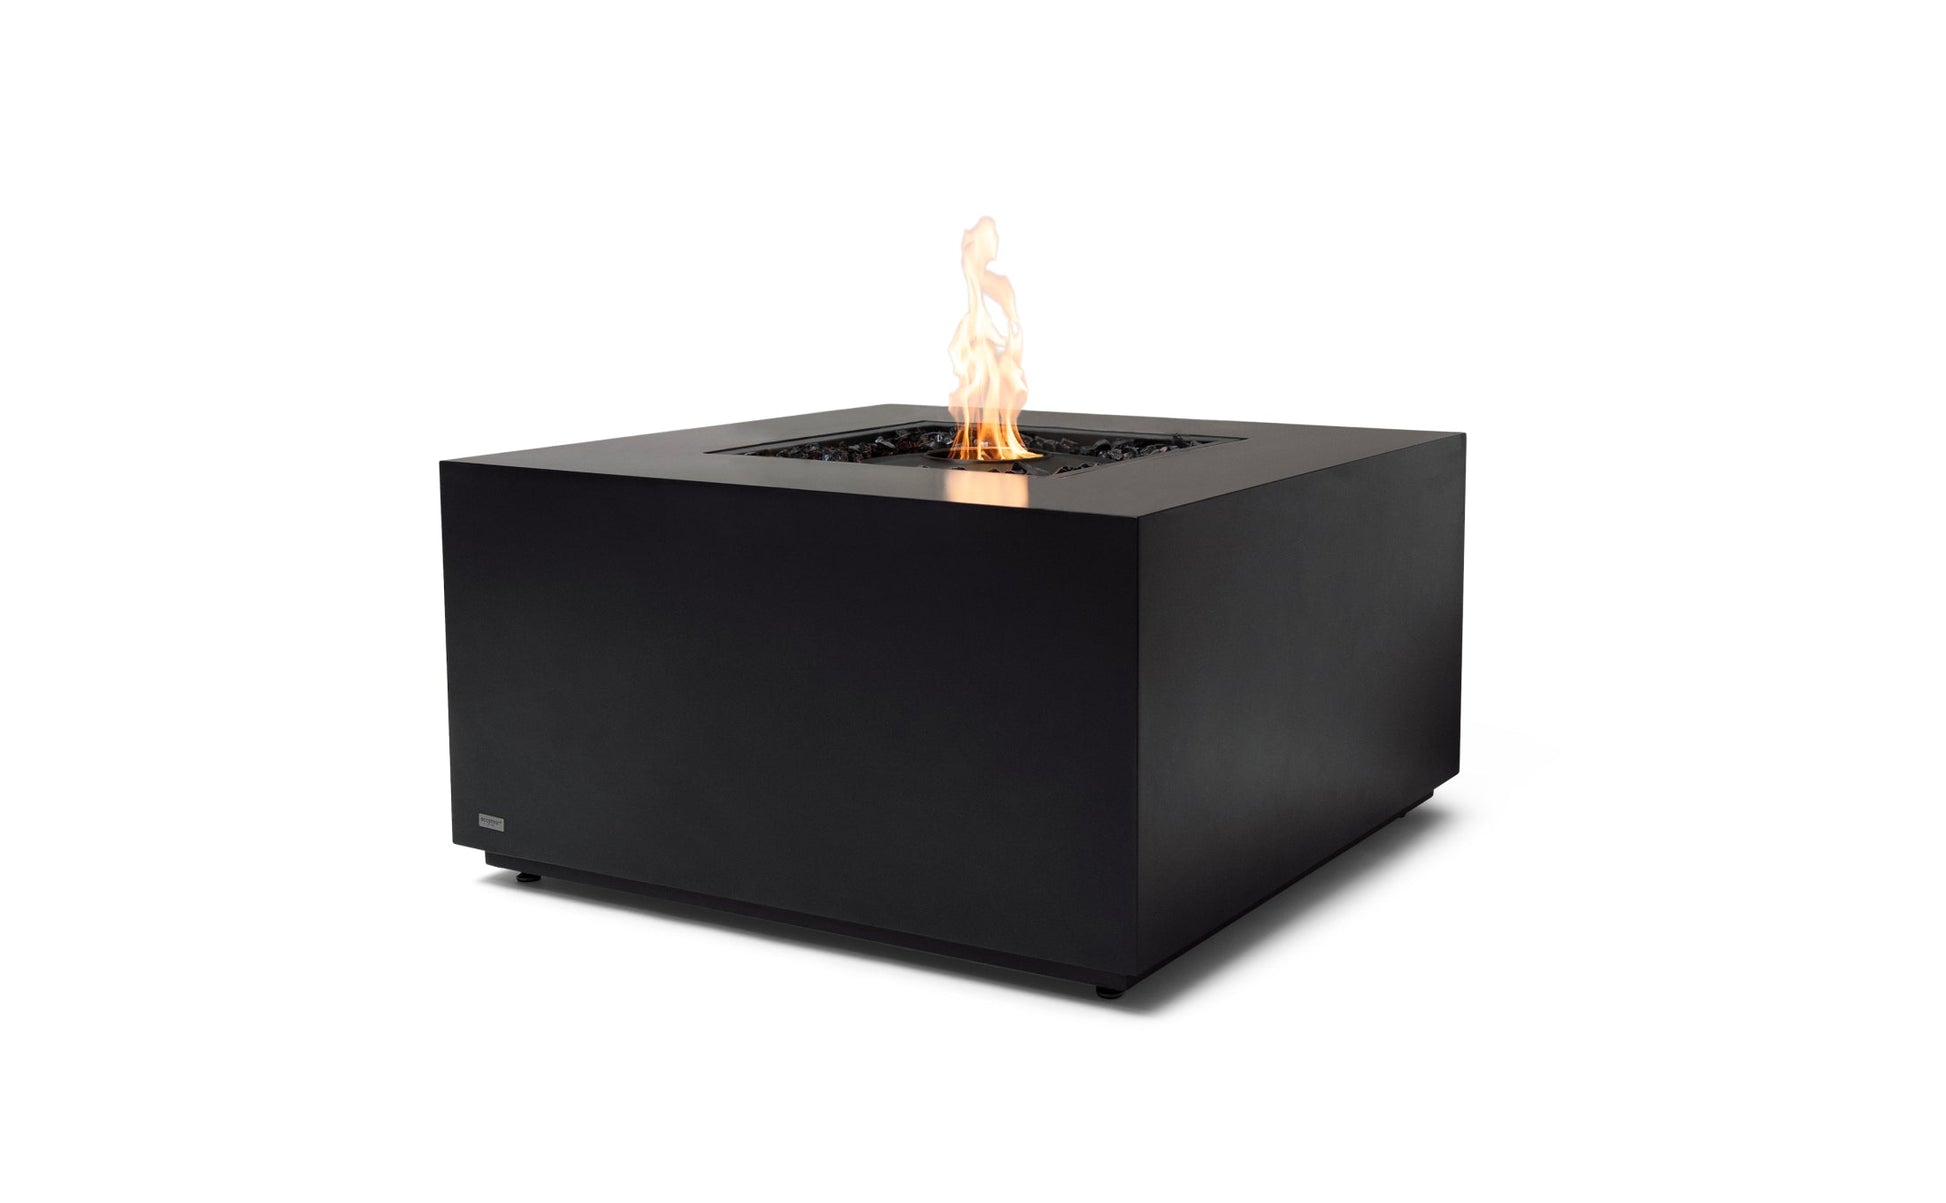 EcoSmart Fire CHASER 38" Graphite Indoor Fire Pit Table with Black Burner by Mad Design Group